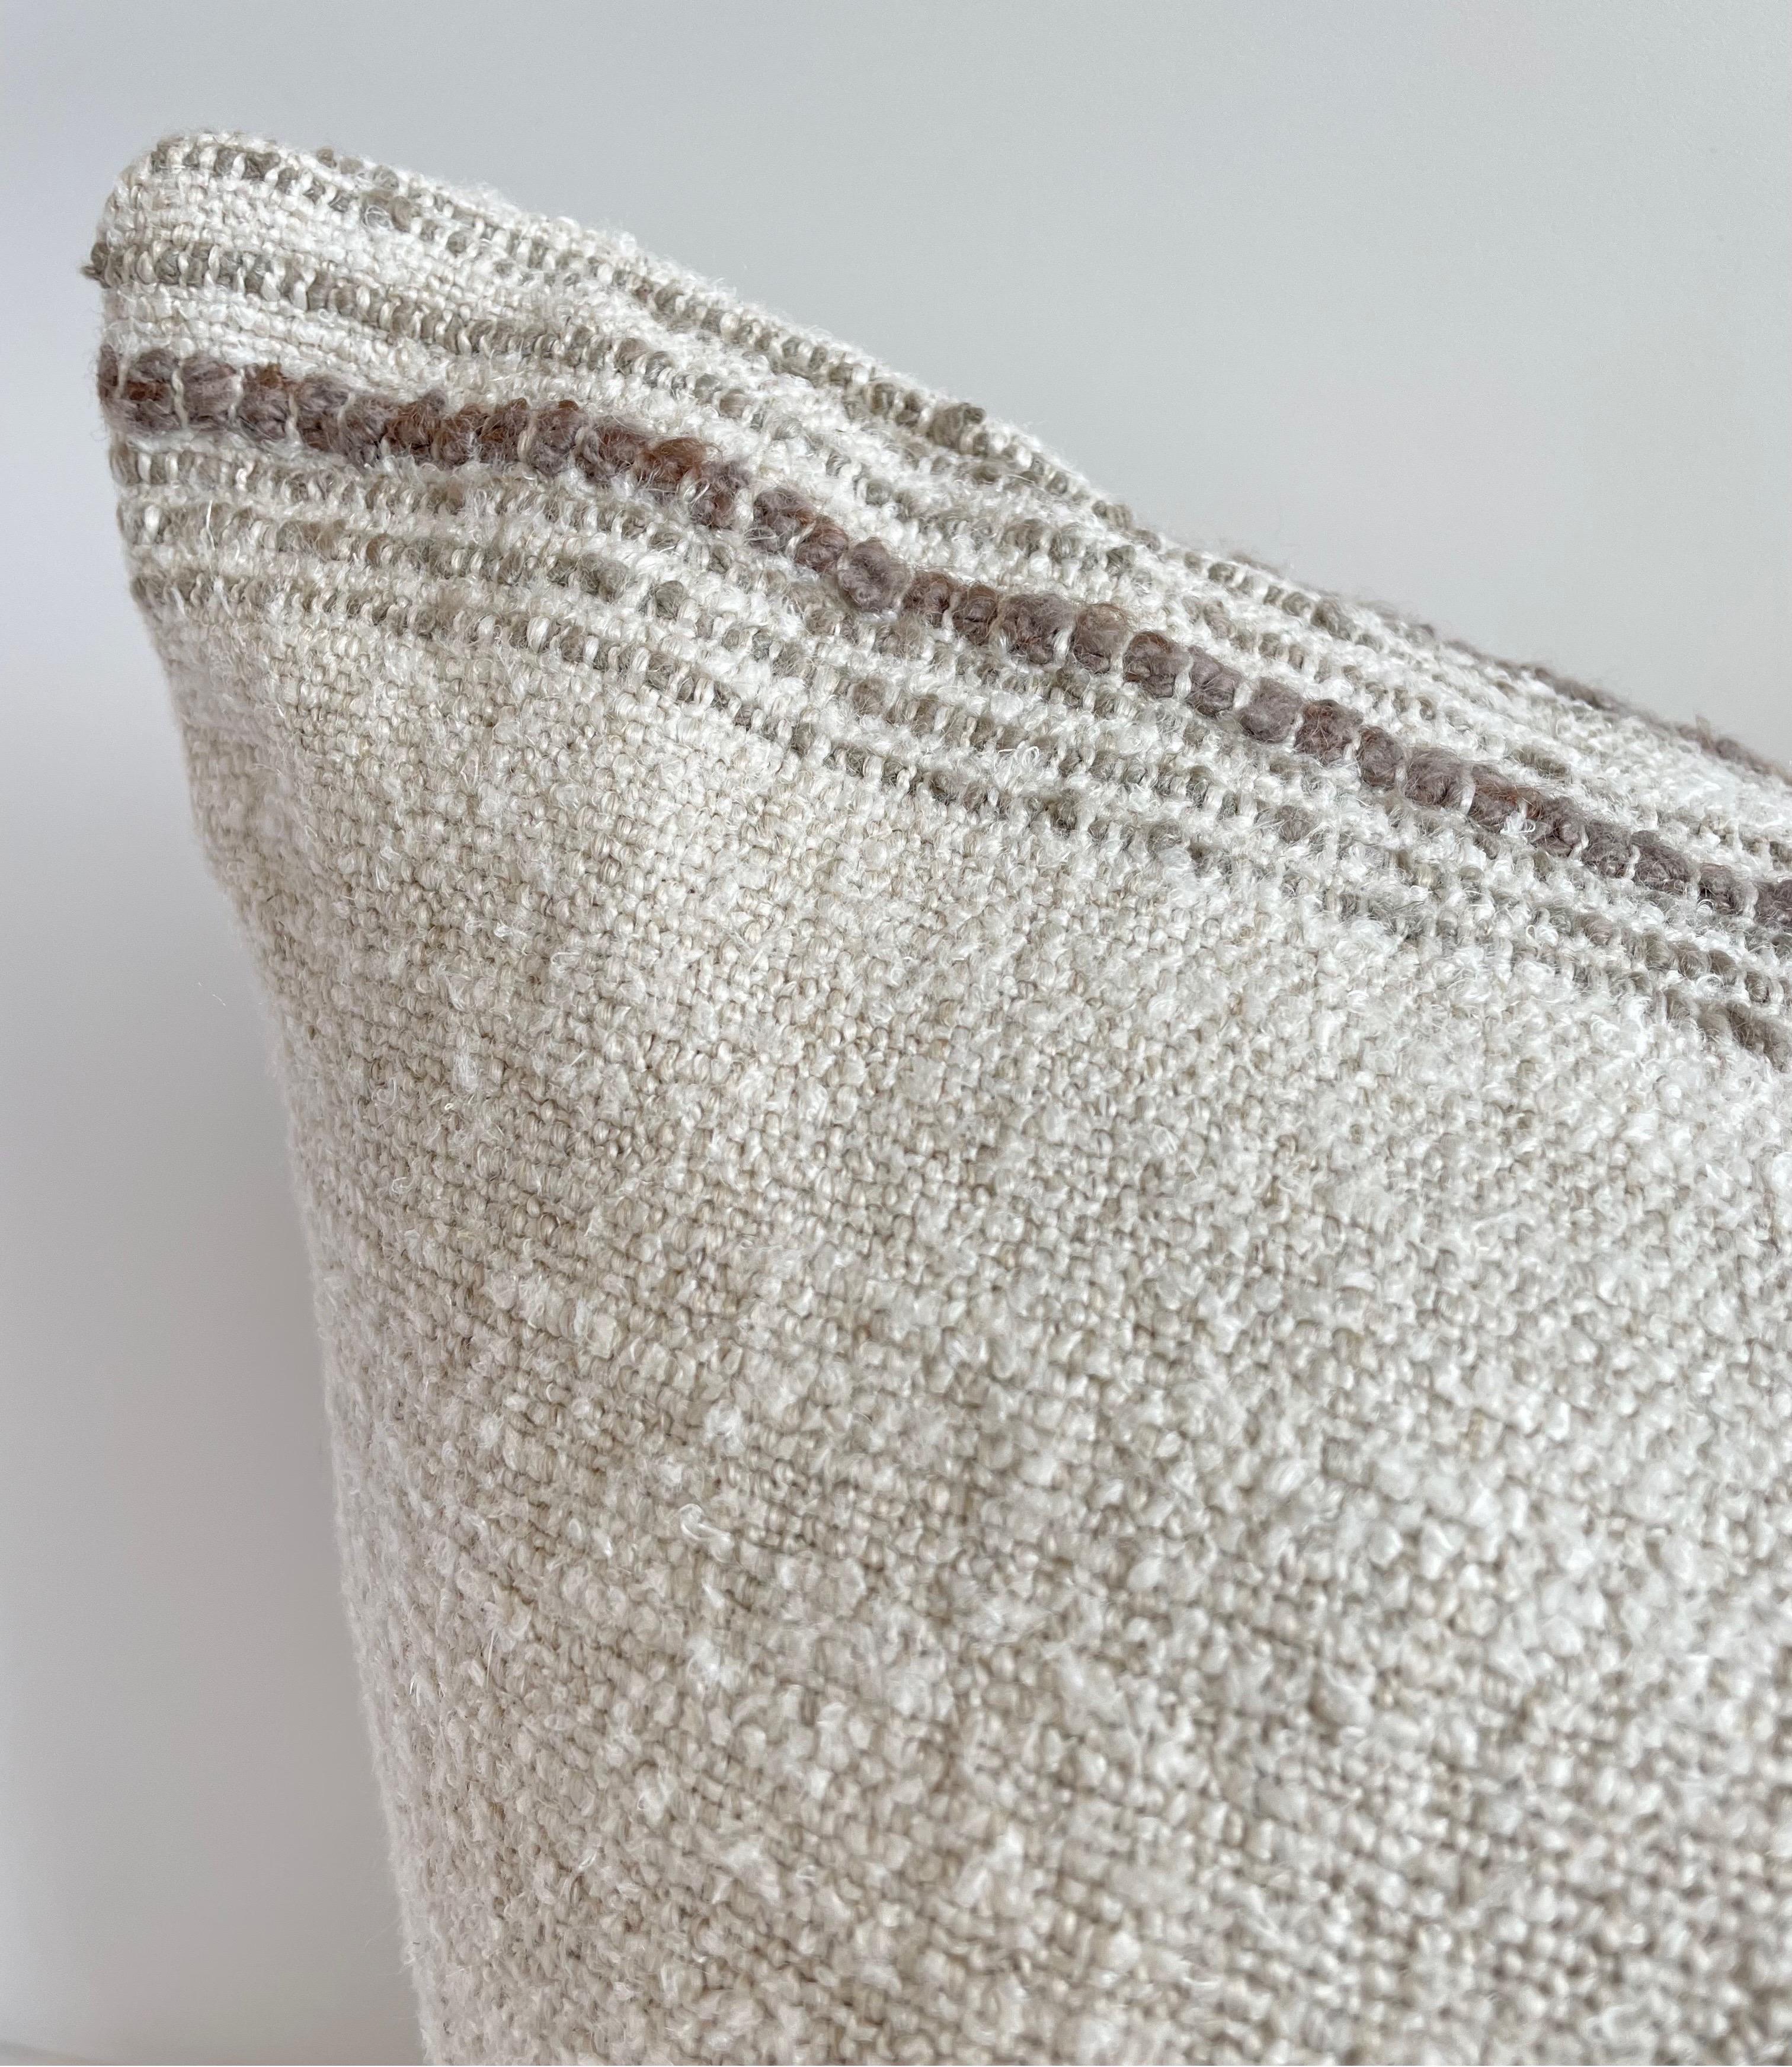 Woven in Belgium using traditional weaving techniques, Bloom Home Inc Daisy features a Belgian Linen warp and alternating Belgian Linen/Mixed Fiber weft. The alternating wefts create a stripe that plays with both texture and color. These pillows